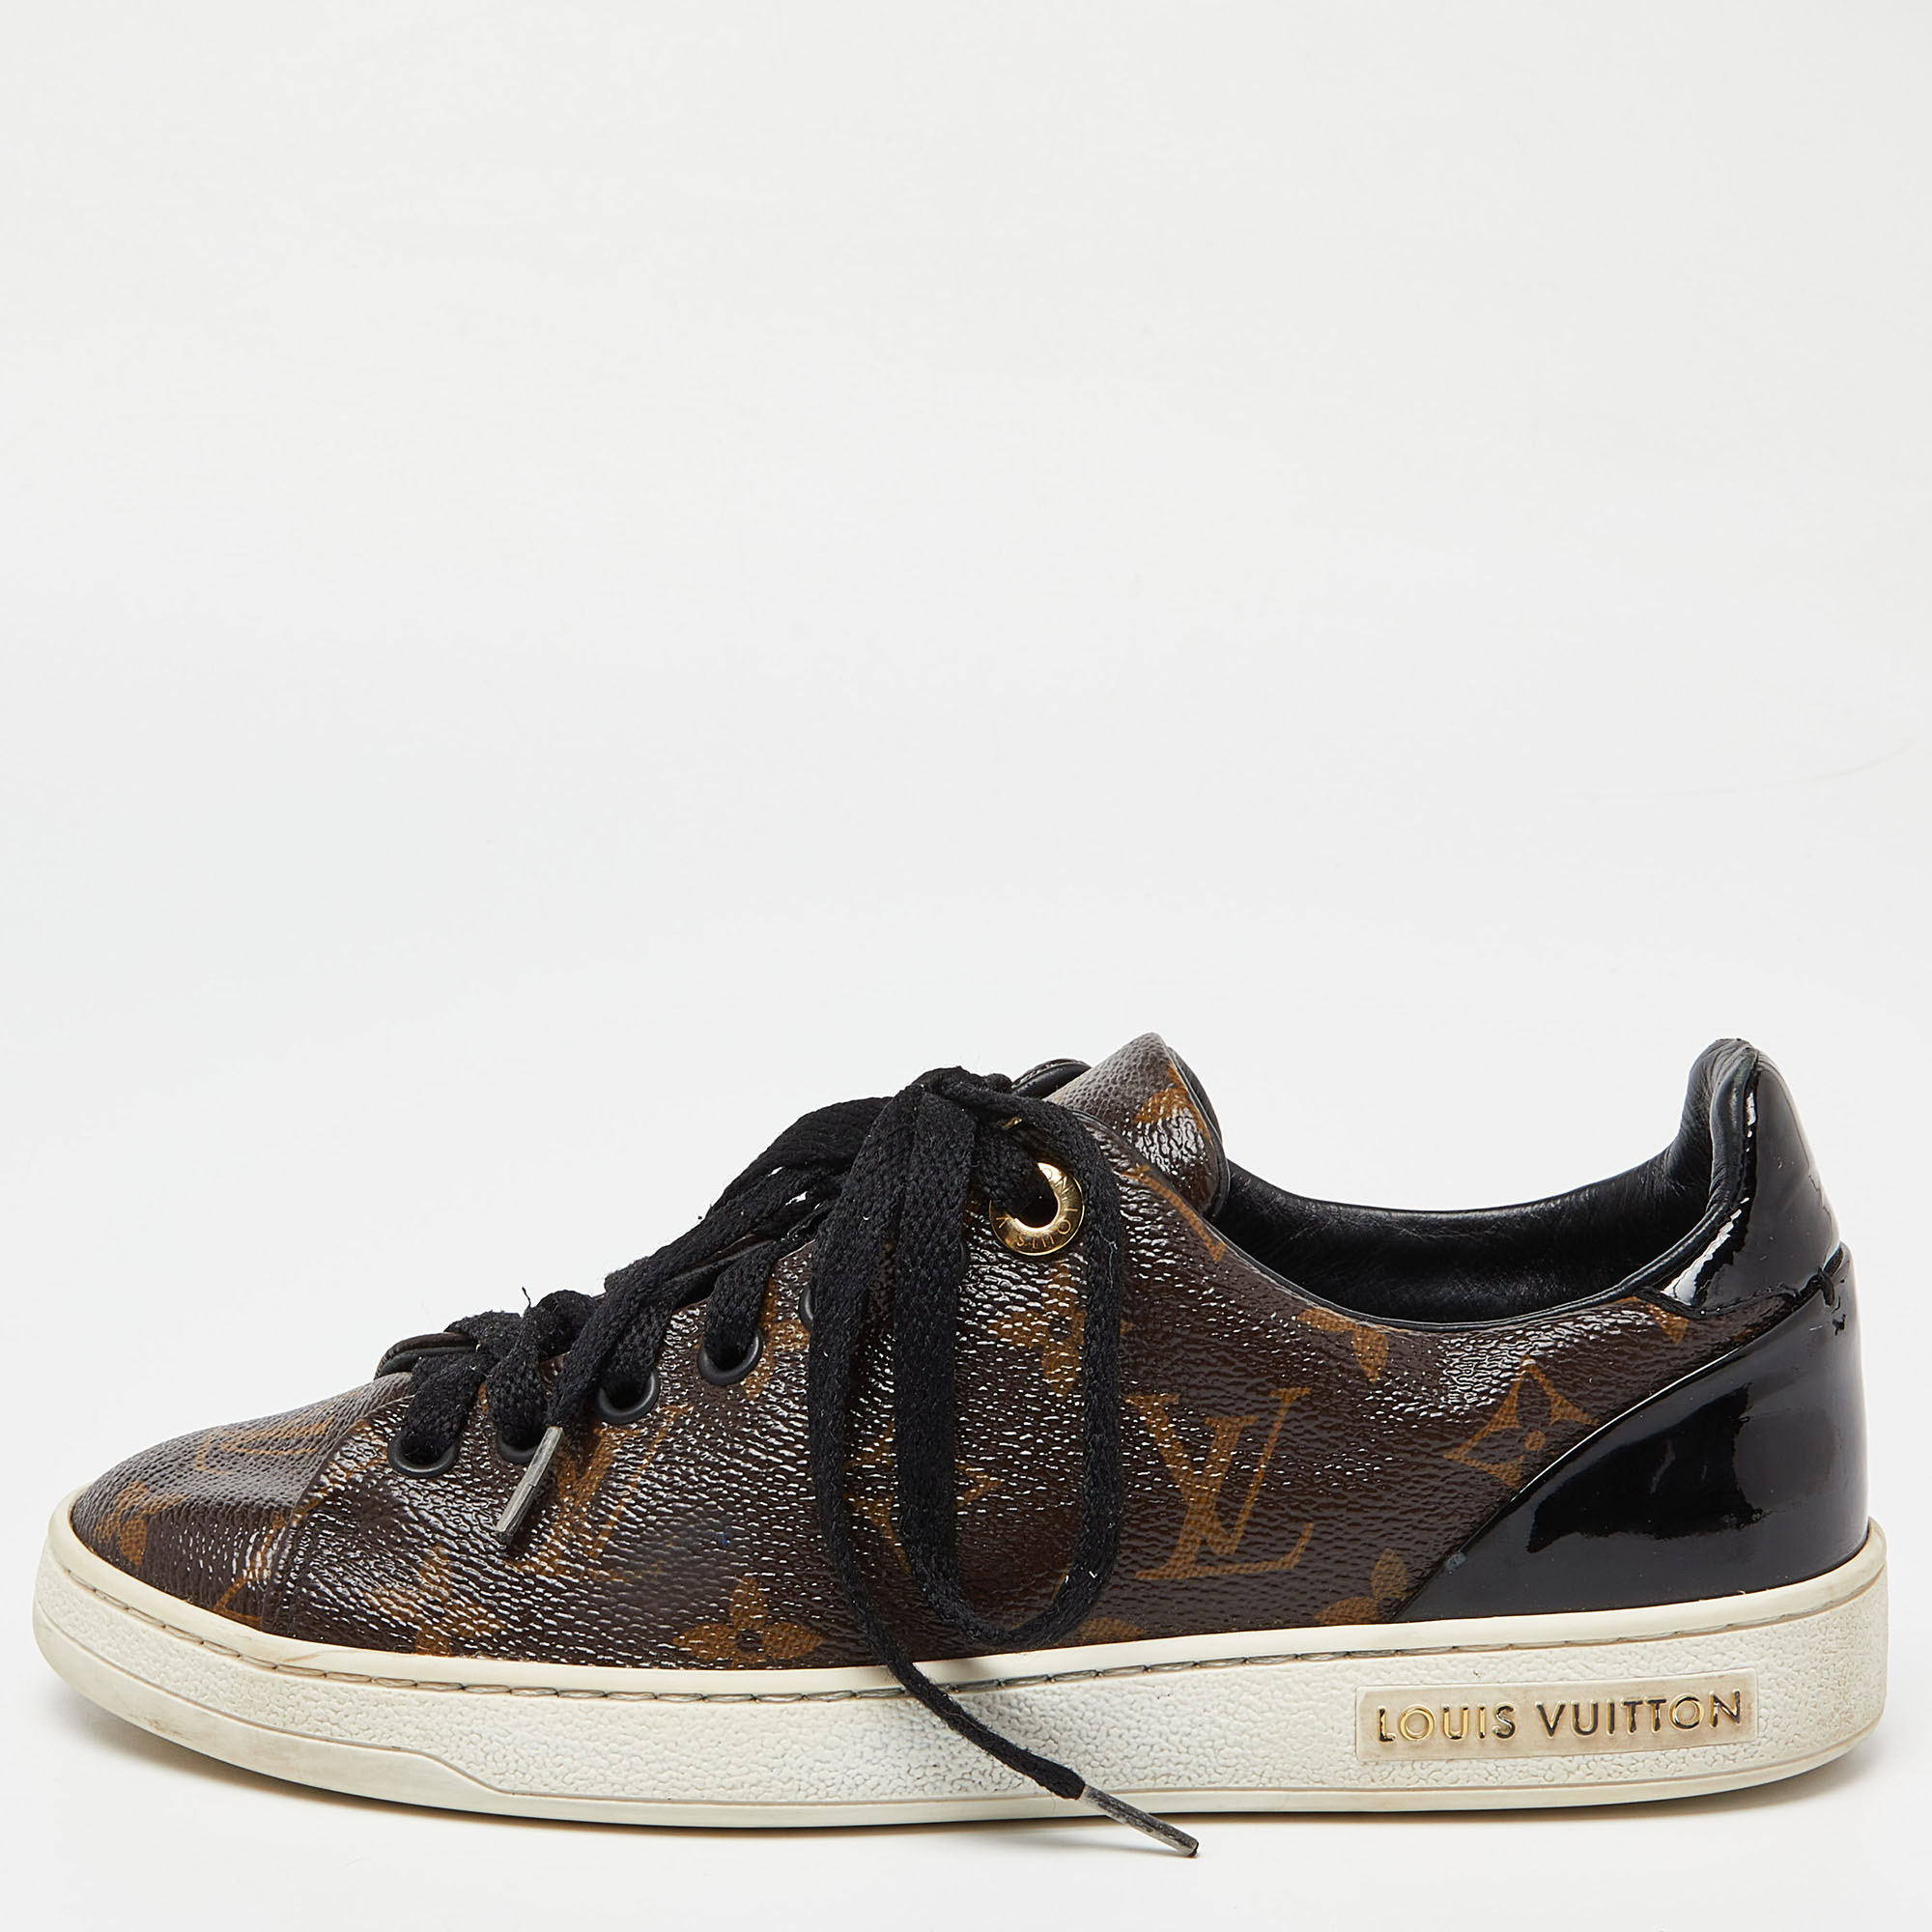 These Frontrow sneakers from Louis Vuitton are all you need to add an extra edge to your outfit. This pair has been crafted from Monogram canvas along with patent leather and styled with round toes lace ups and gold tone logo details on the midsoles. Balanced on rubber soles these shoes aim to provide you with comfortable steps.